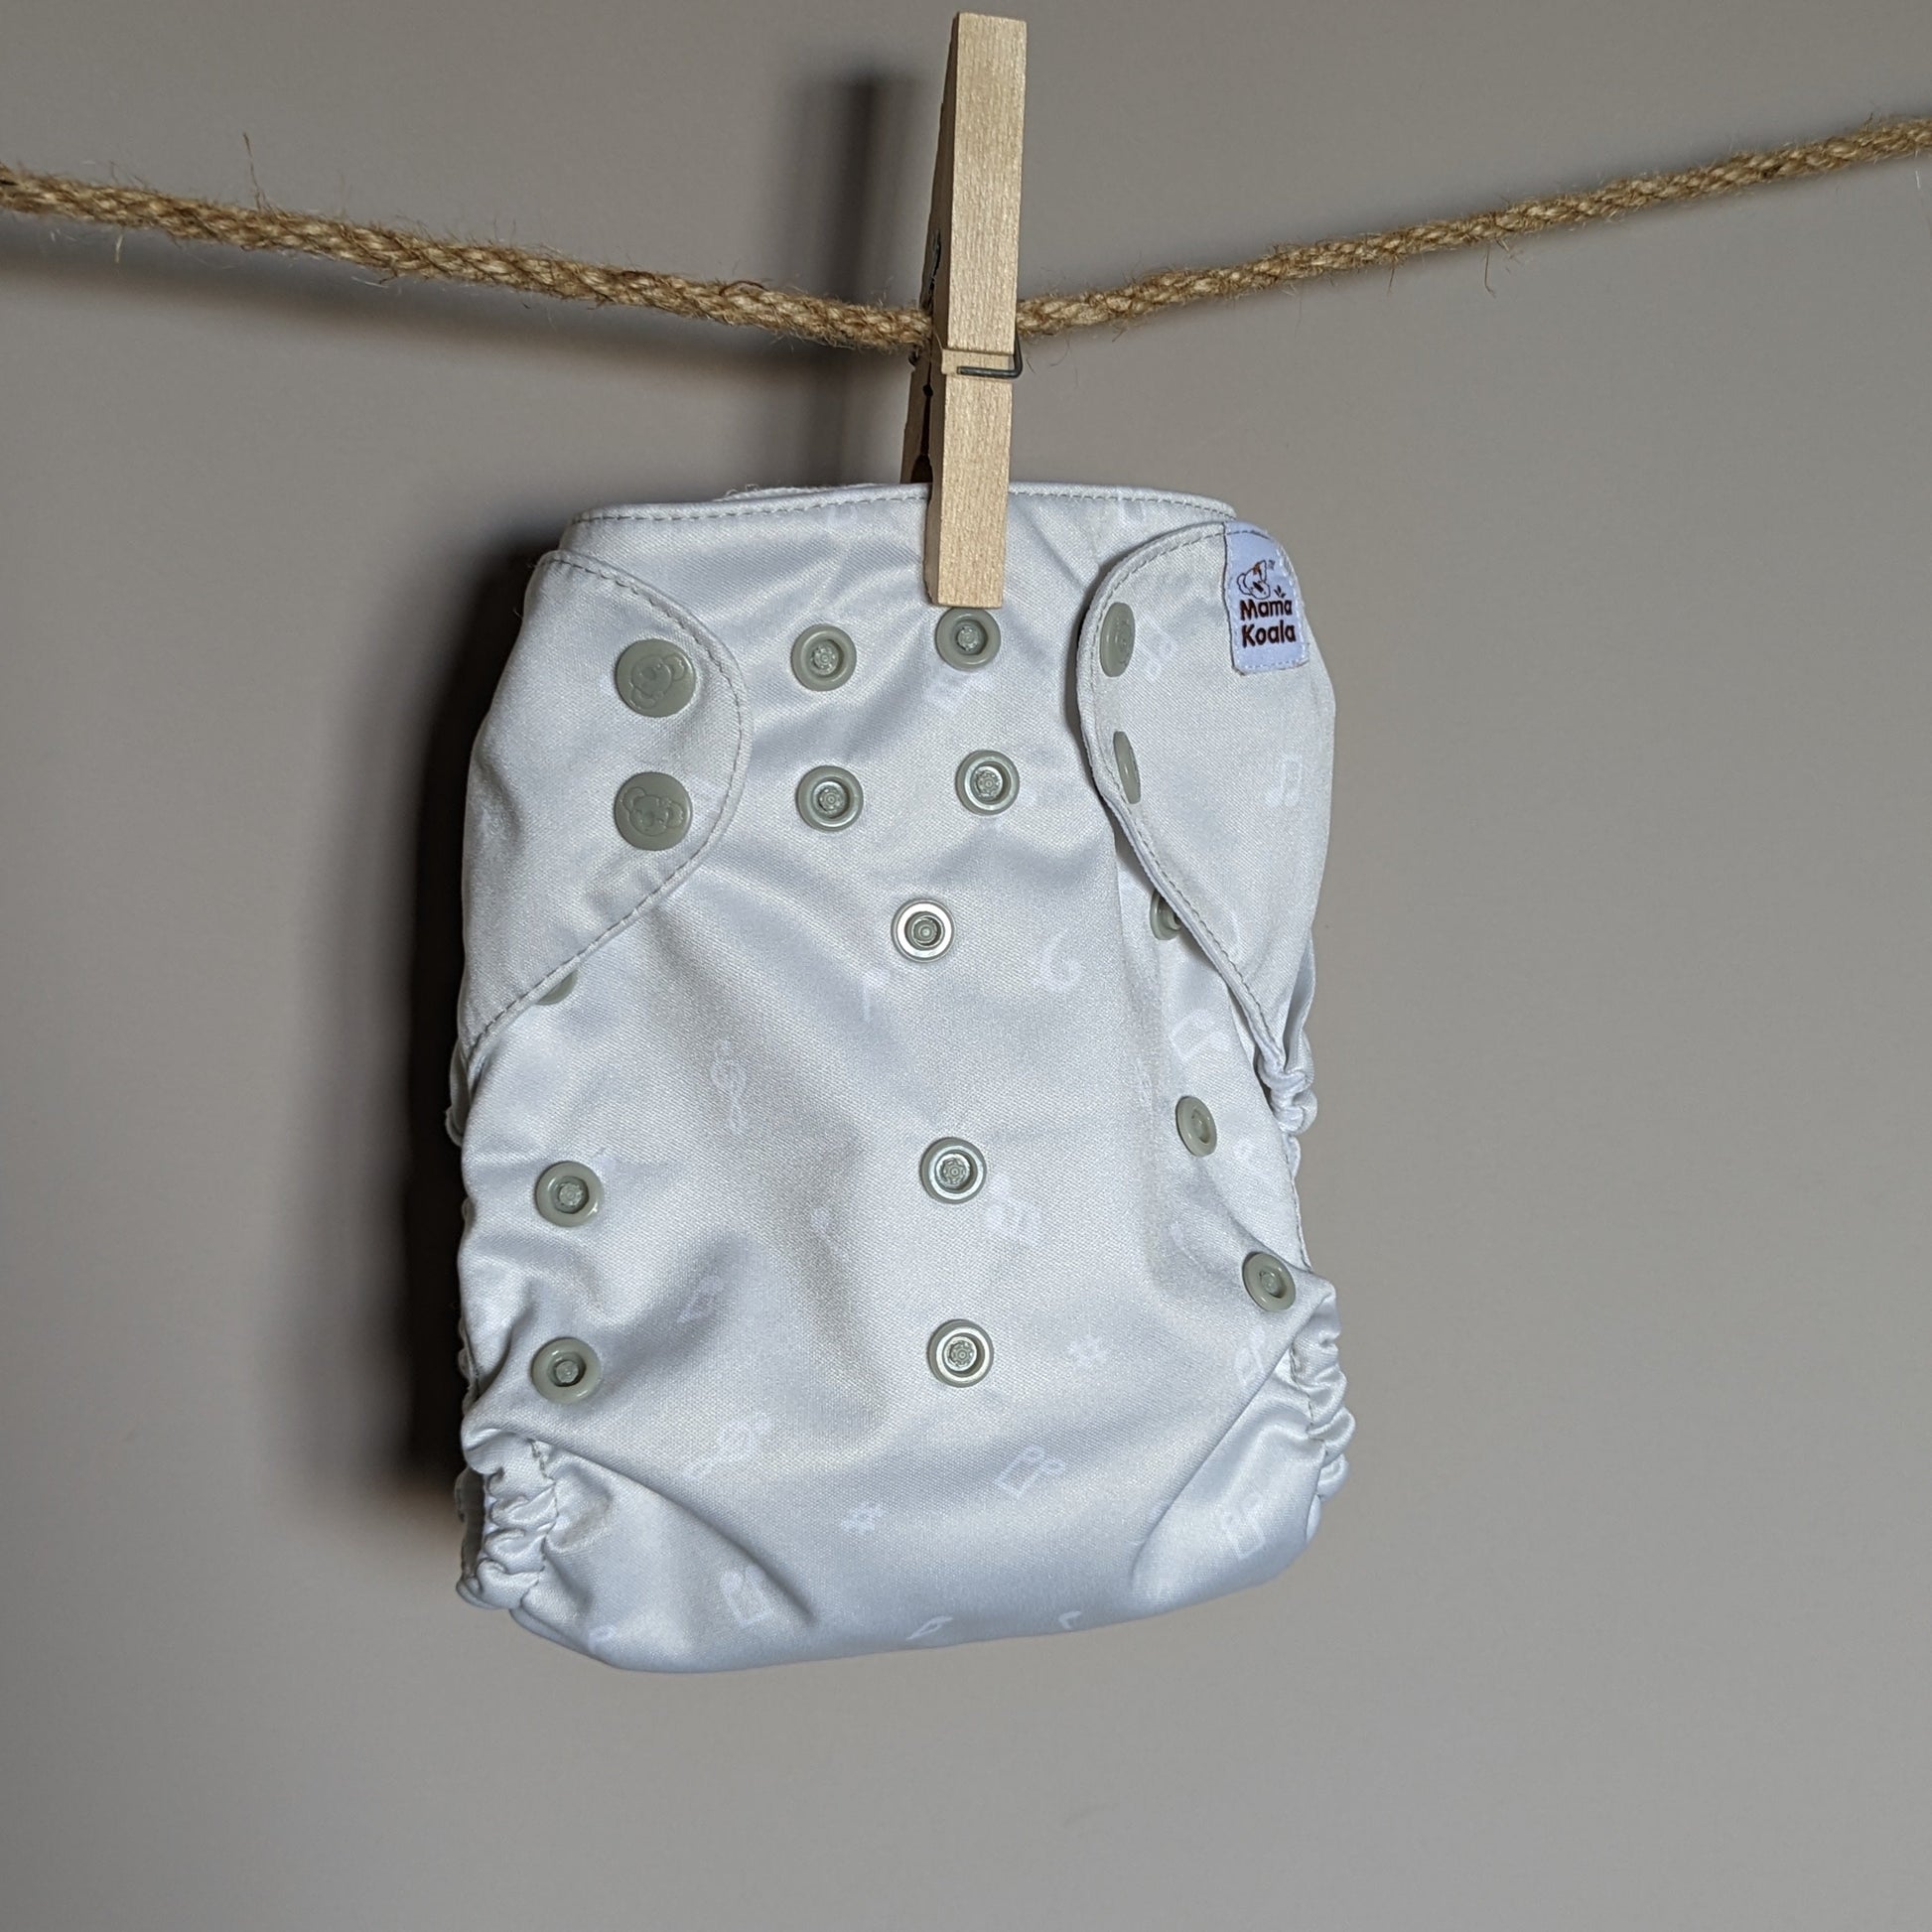 Moma Koala Pocket Nappy-Pocket Nappy-Moma Koala-Music Notes-The Nappy Market